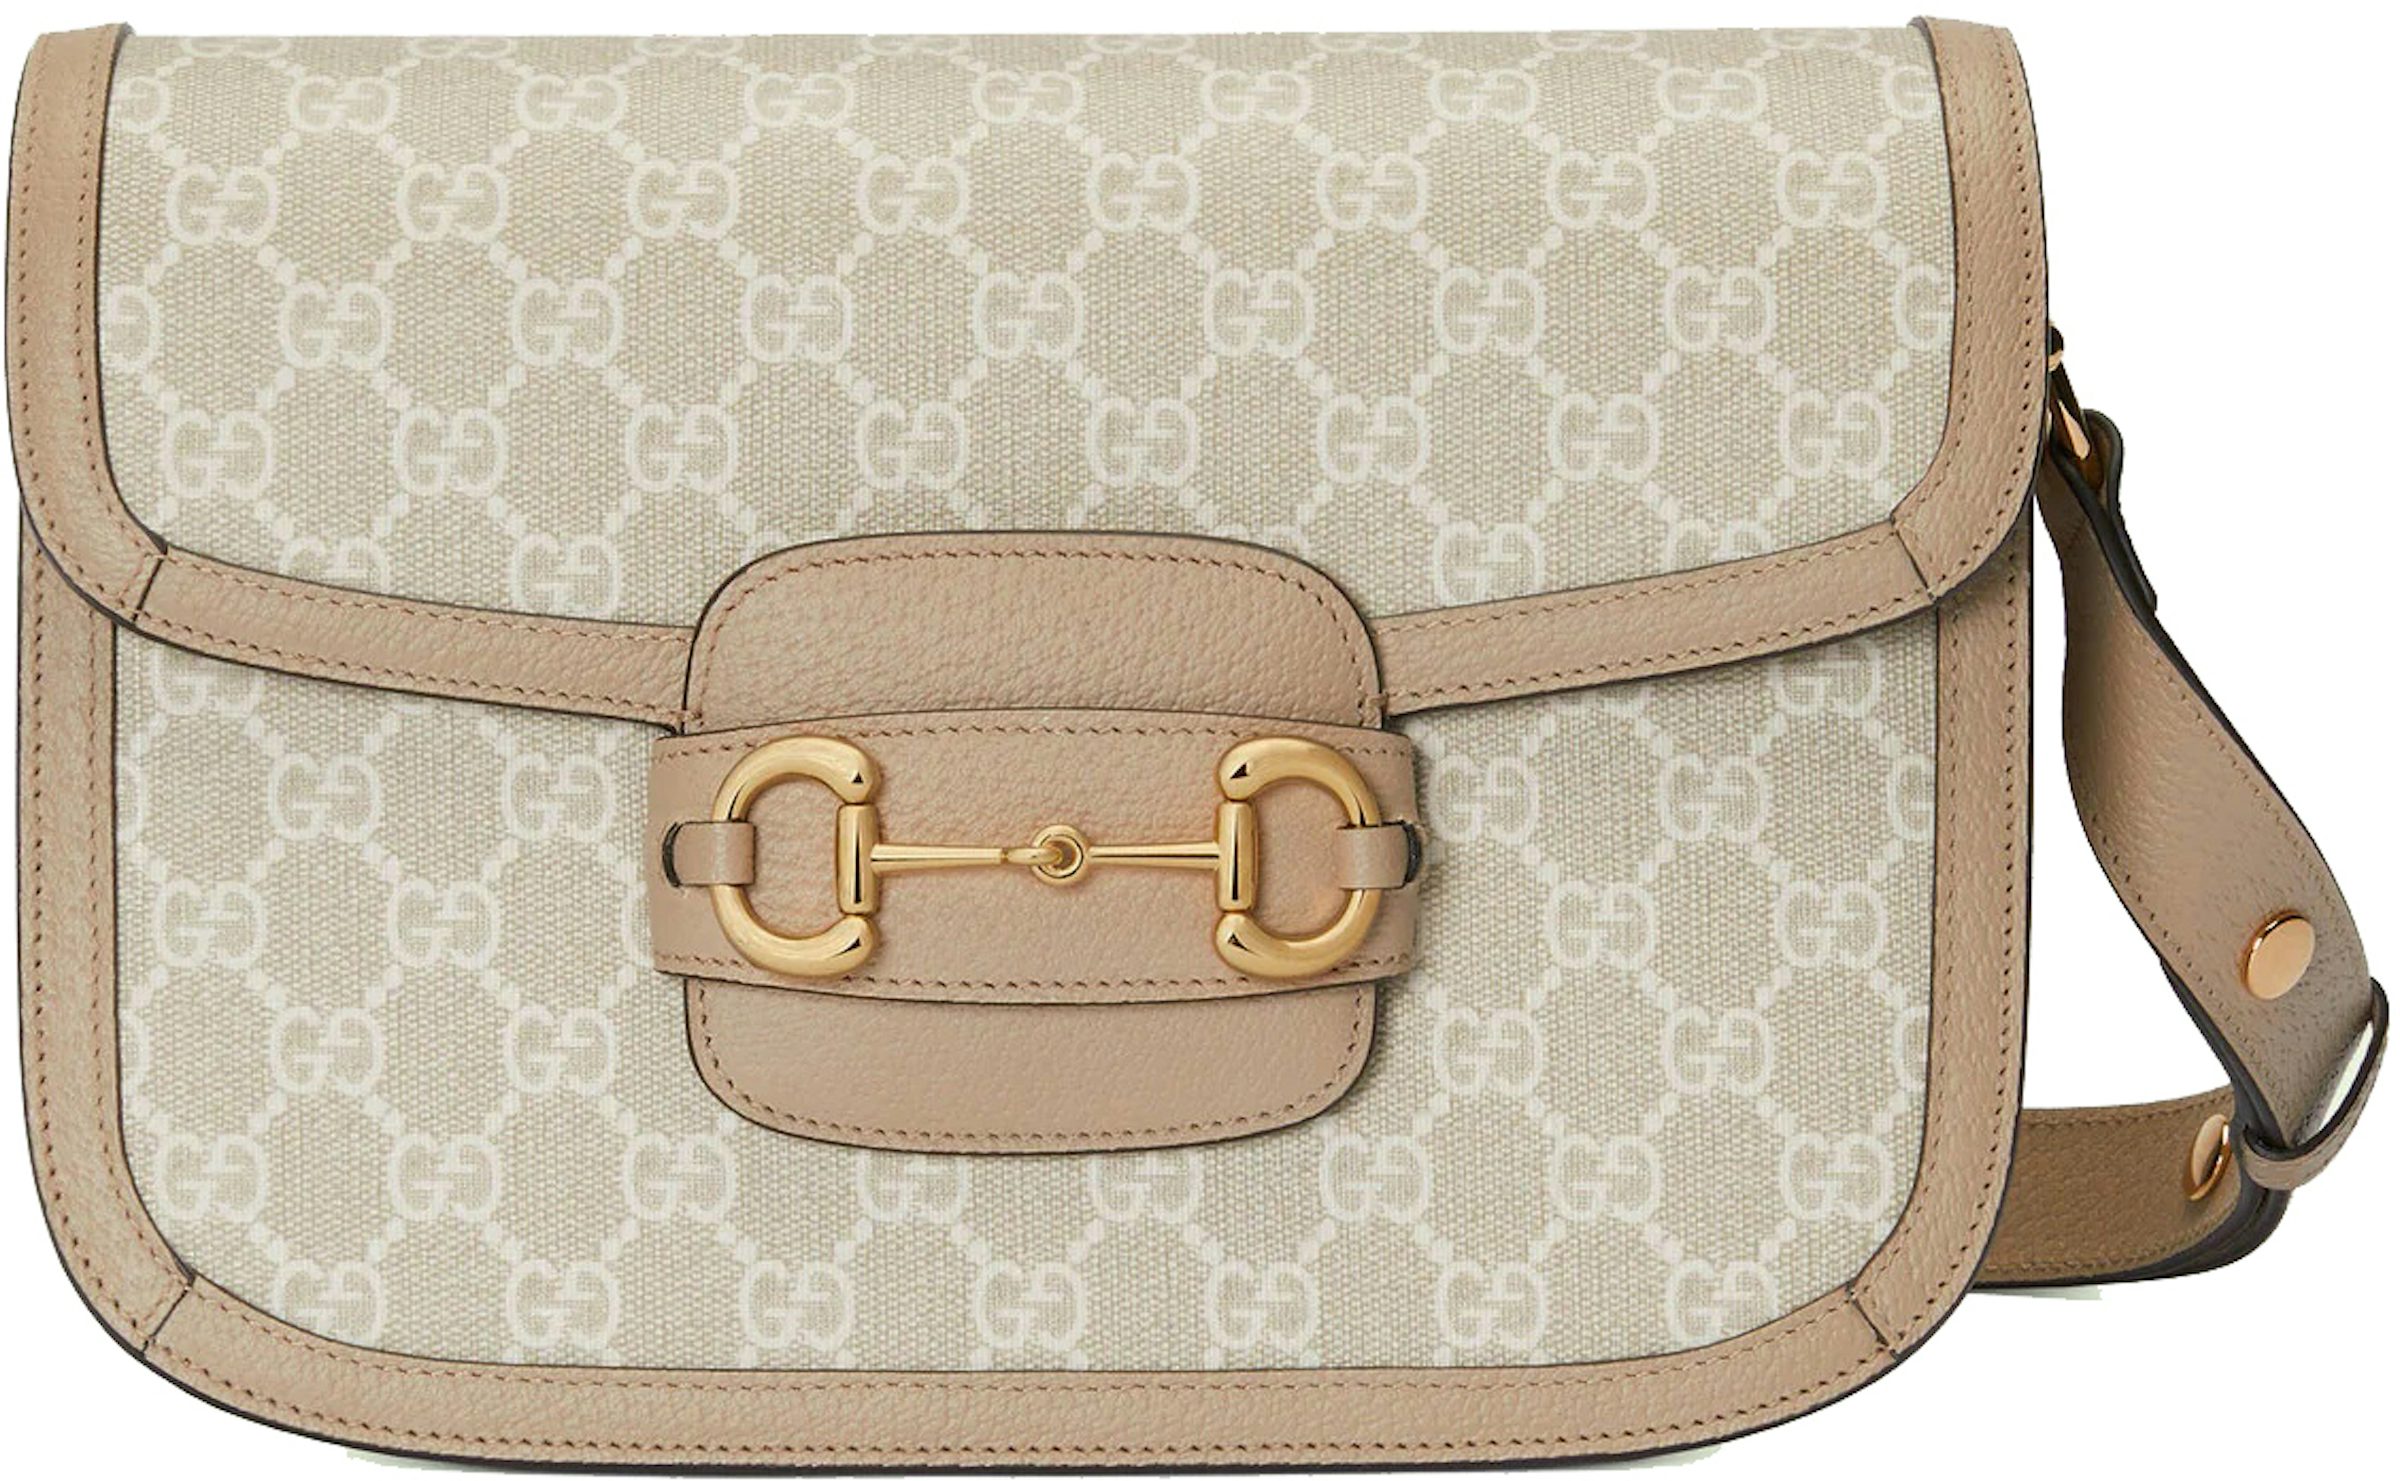 Beige 1955 Horsebit GG-Supreme canvas and leather bag, Gucci